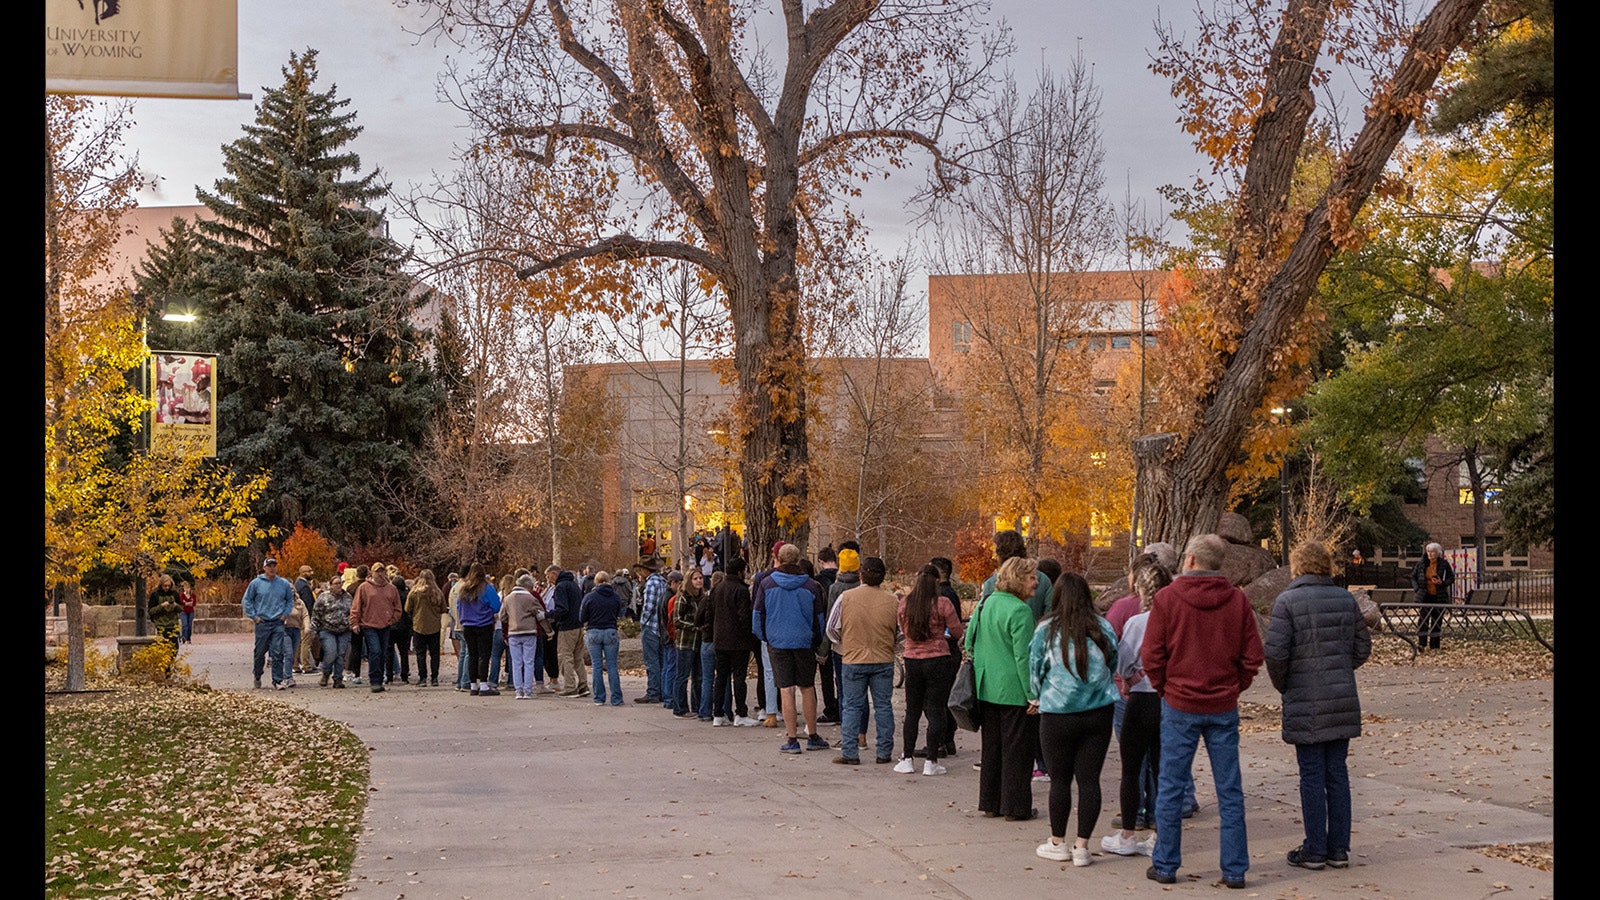 Riley Gaines drew people from all over the region to hear her speak on the University of Wyoming campus in Laramie on Tuesday.